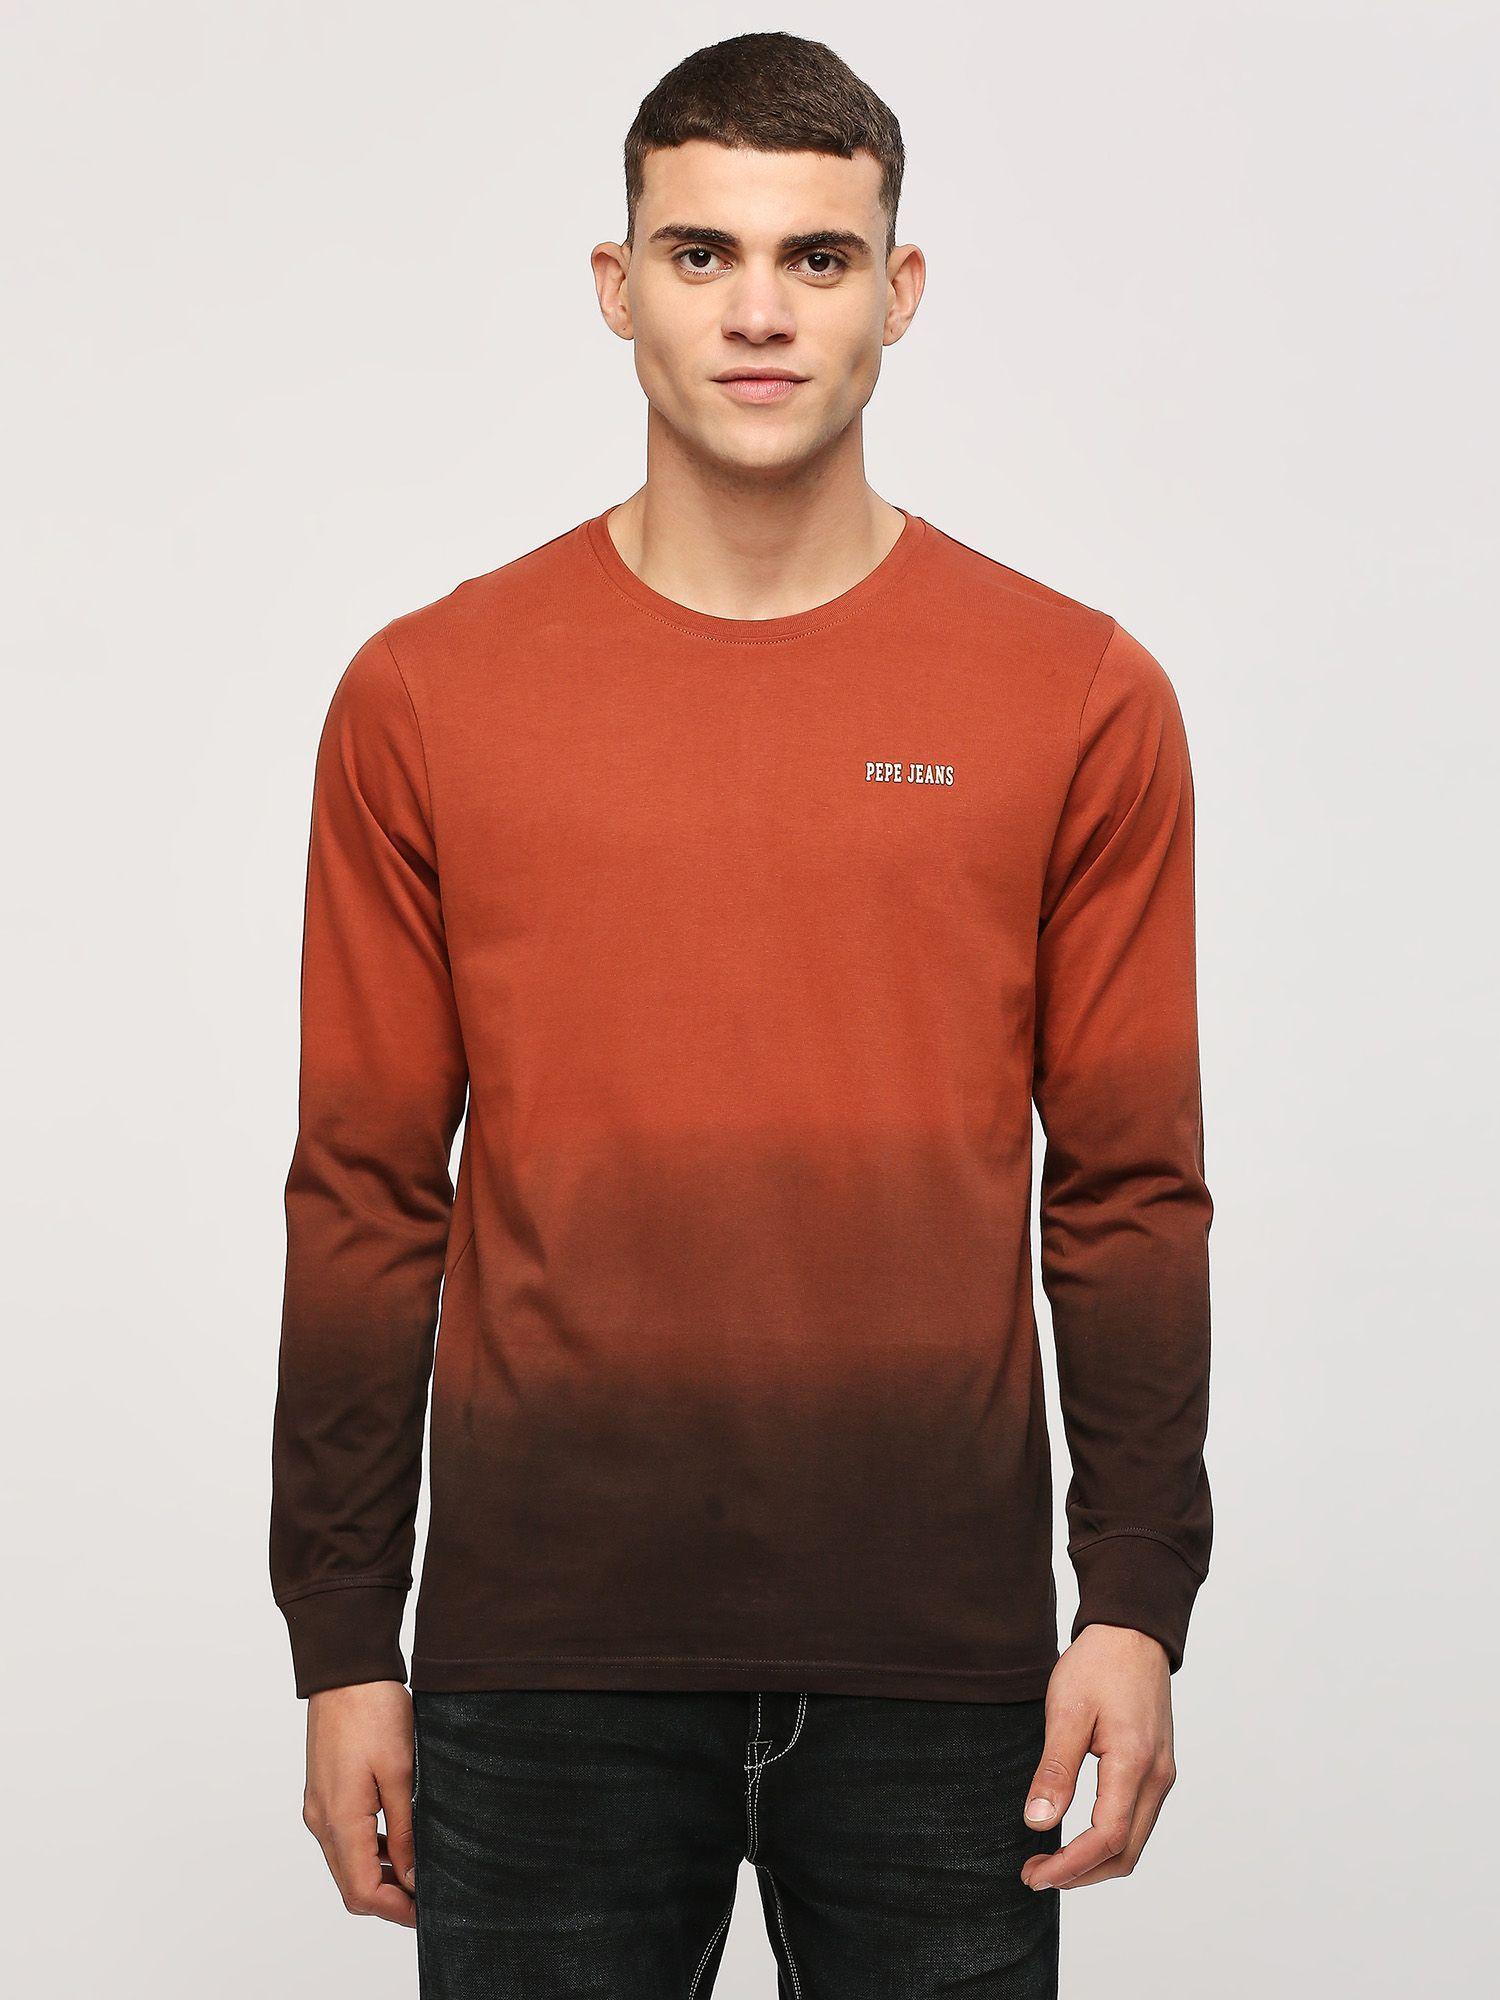 red-ombre-printed-long-sleeve-t-shirt